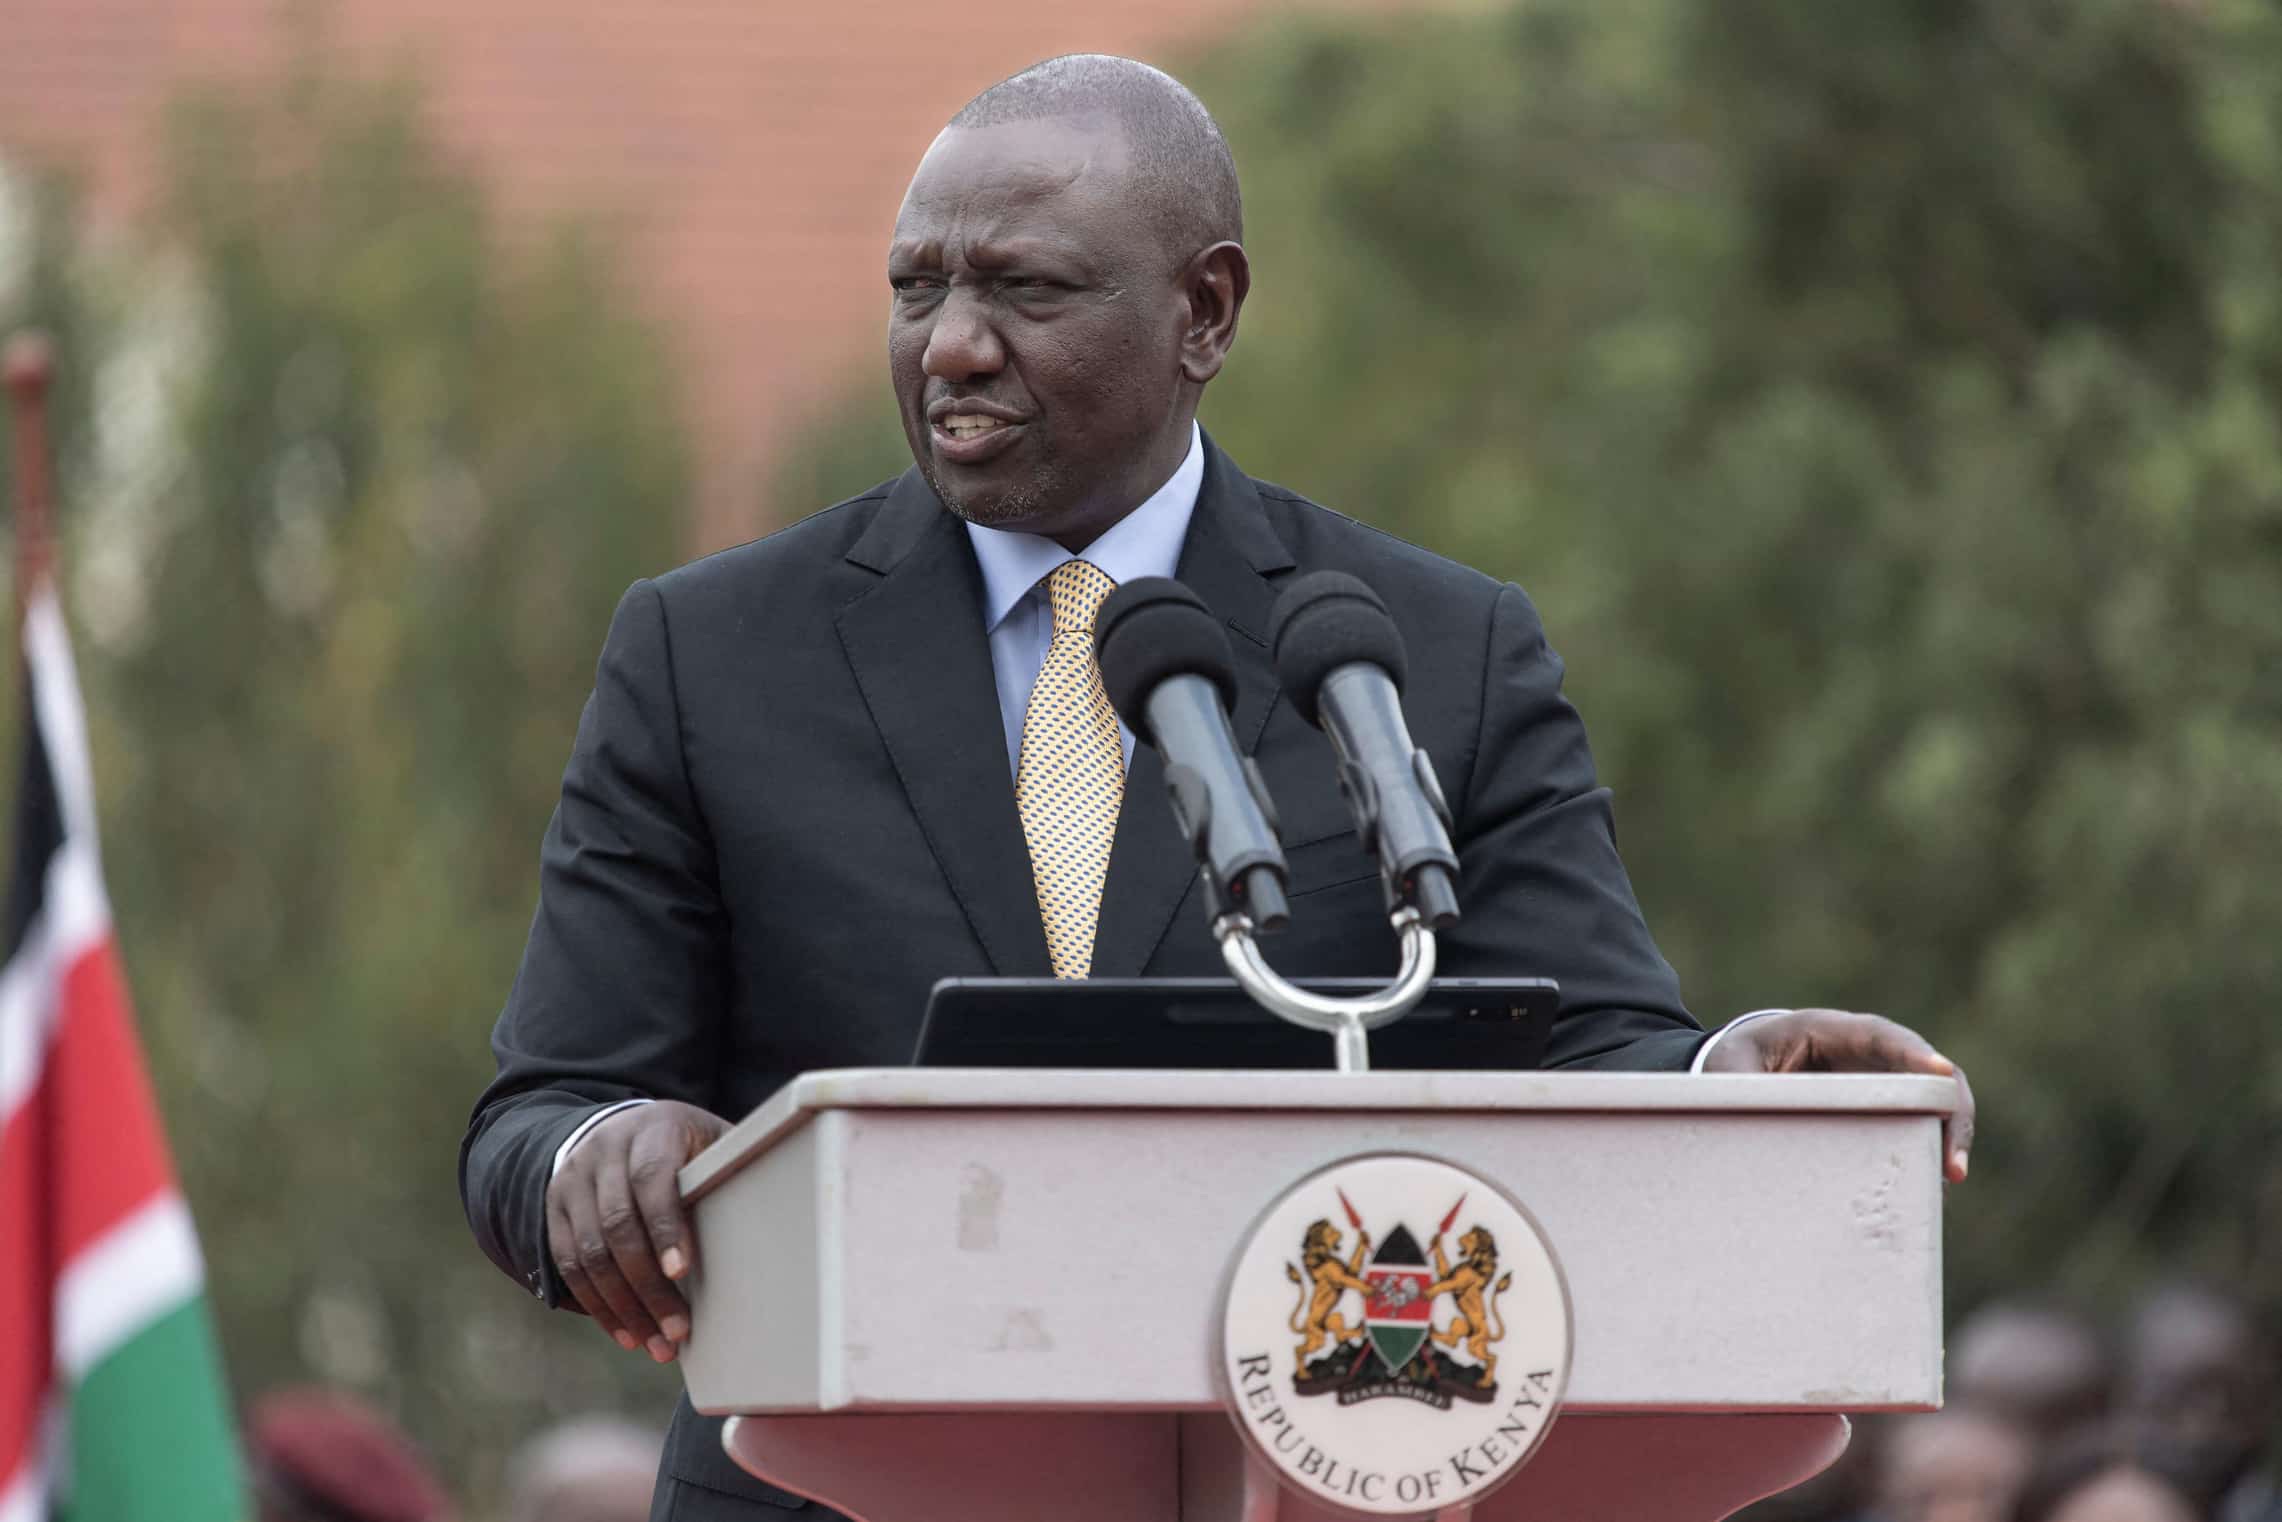 William ruto is the fifth youngest president in Africa 